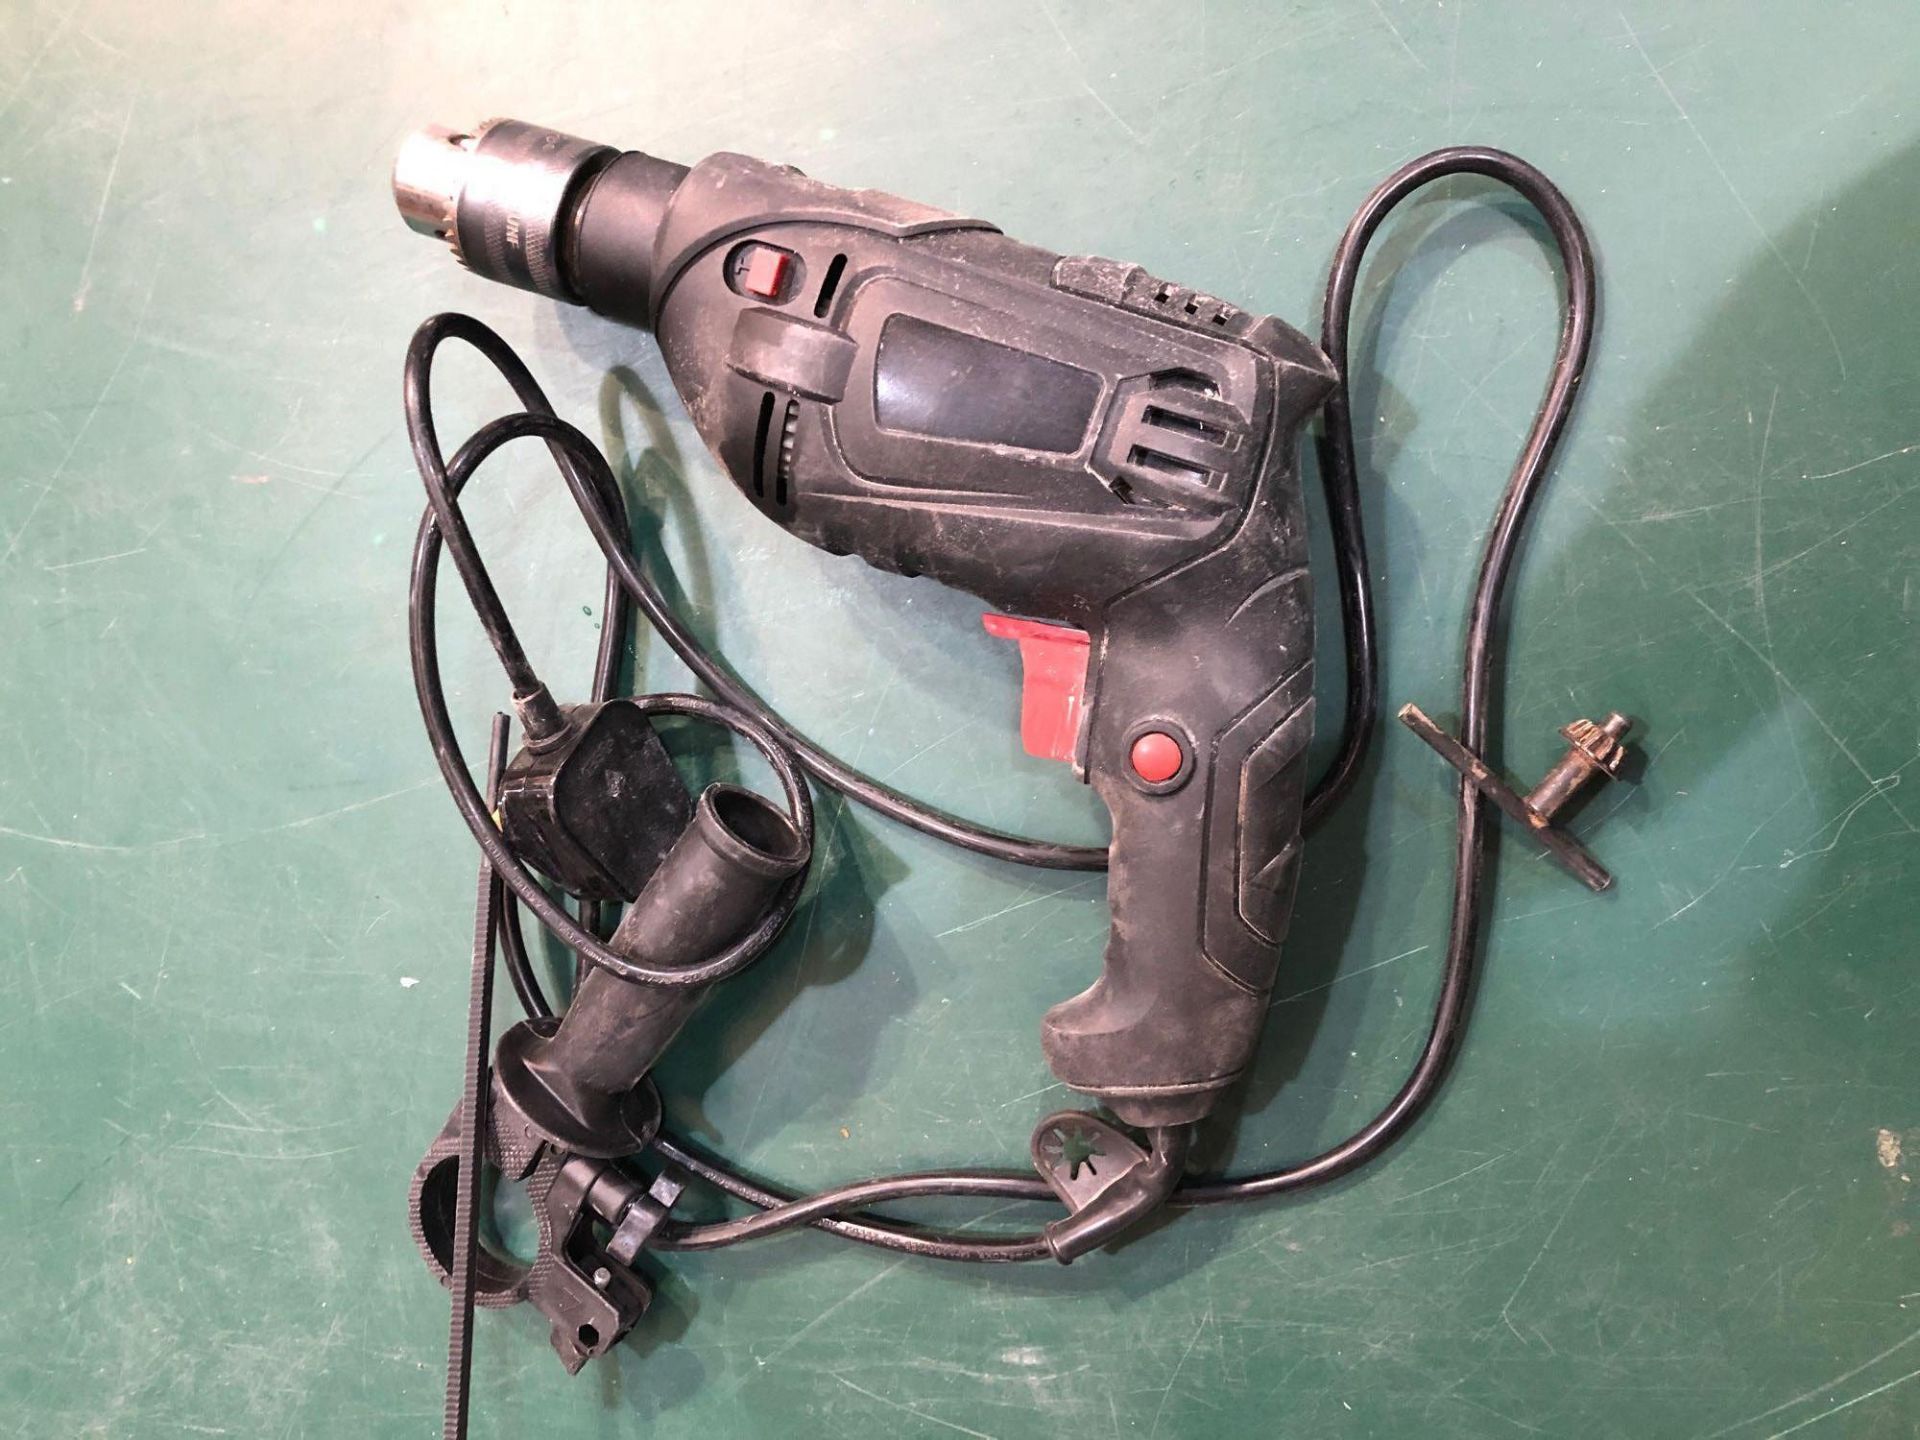 Simple Value Corded Hammer Drill - 500W PDI500GE - Image 2 of 5